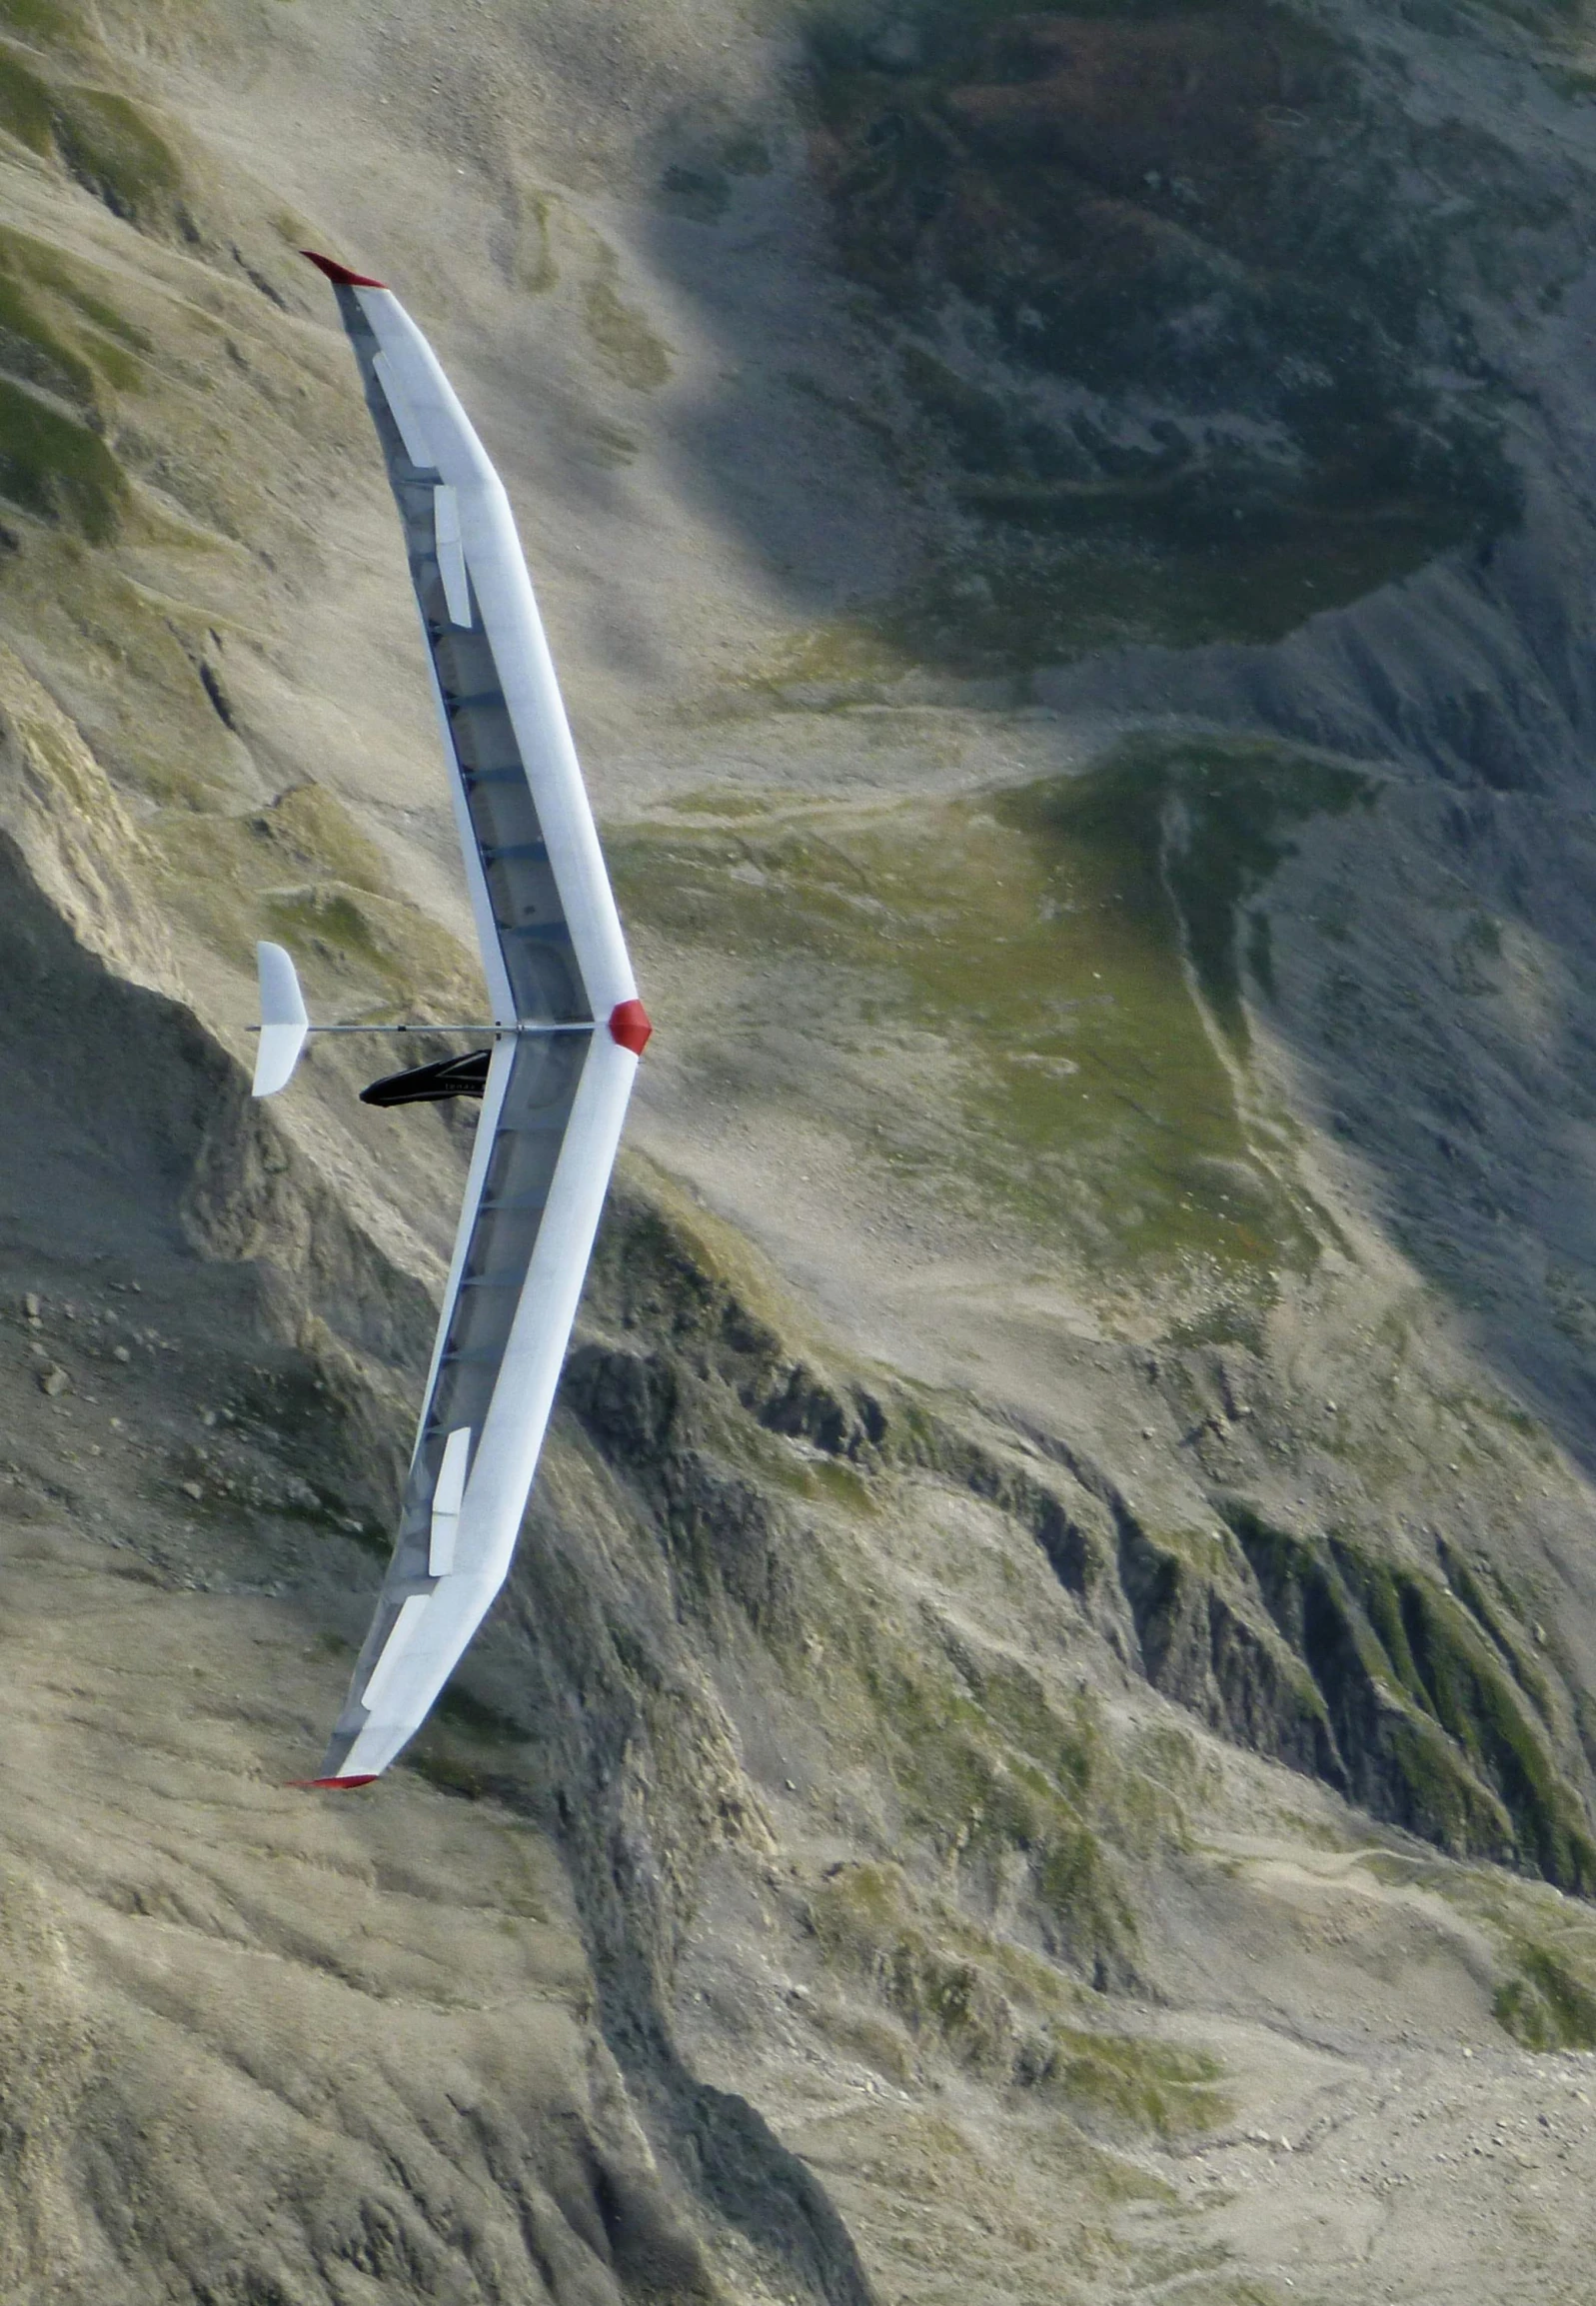 the aerial view of a glider's tail from above